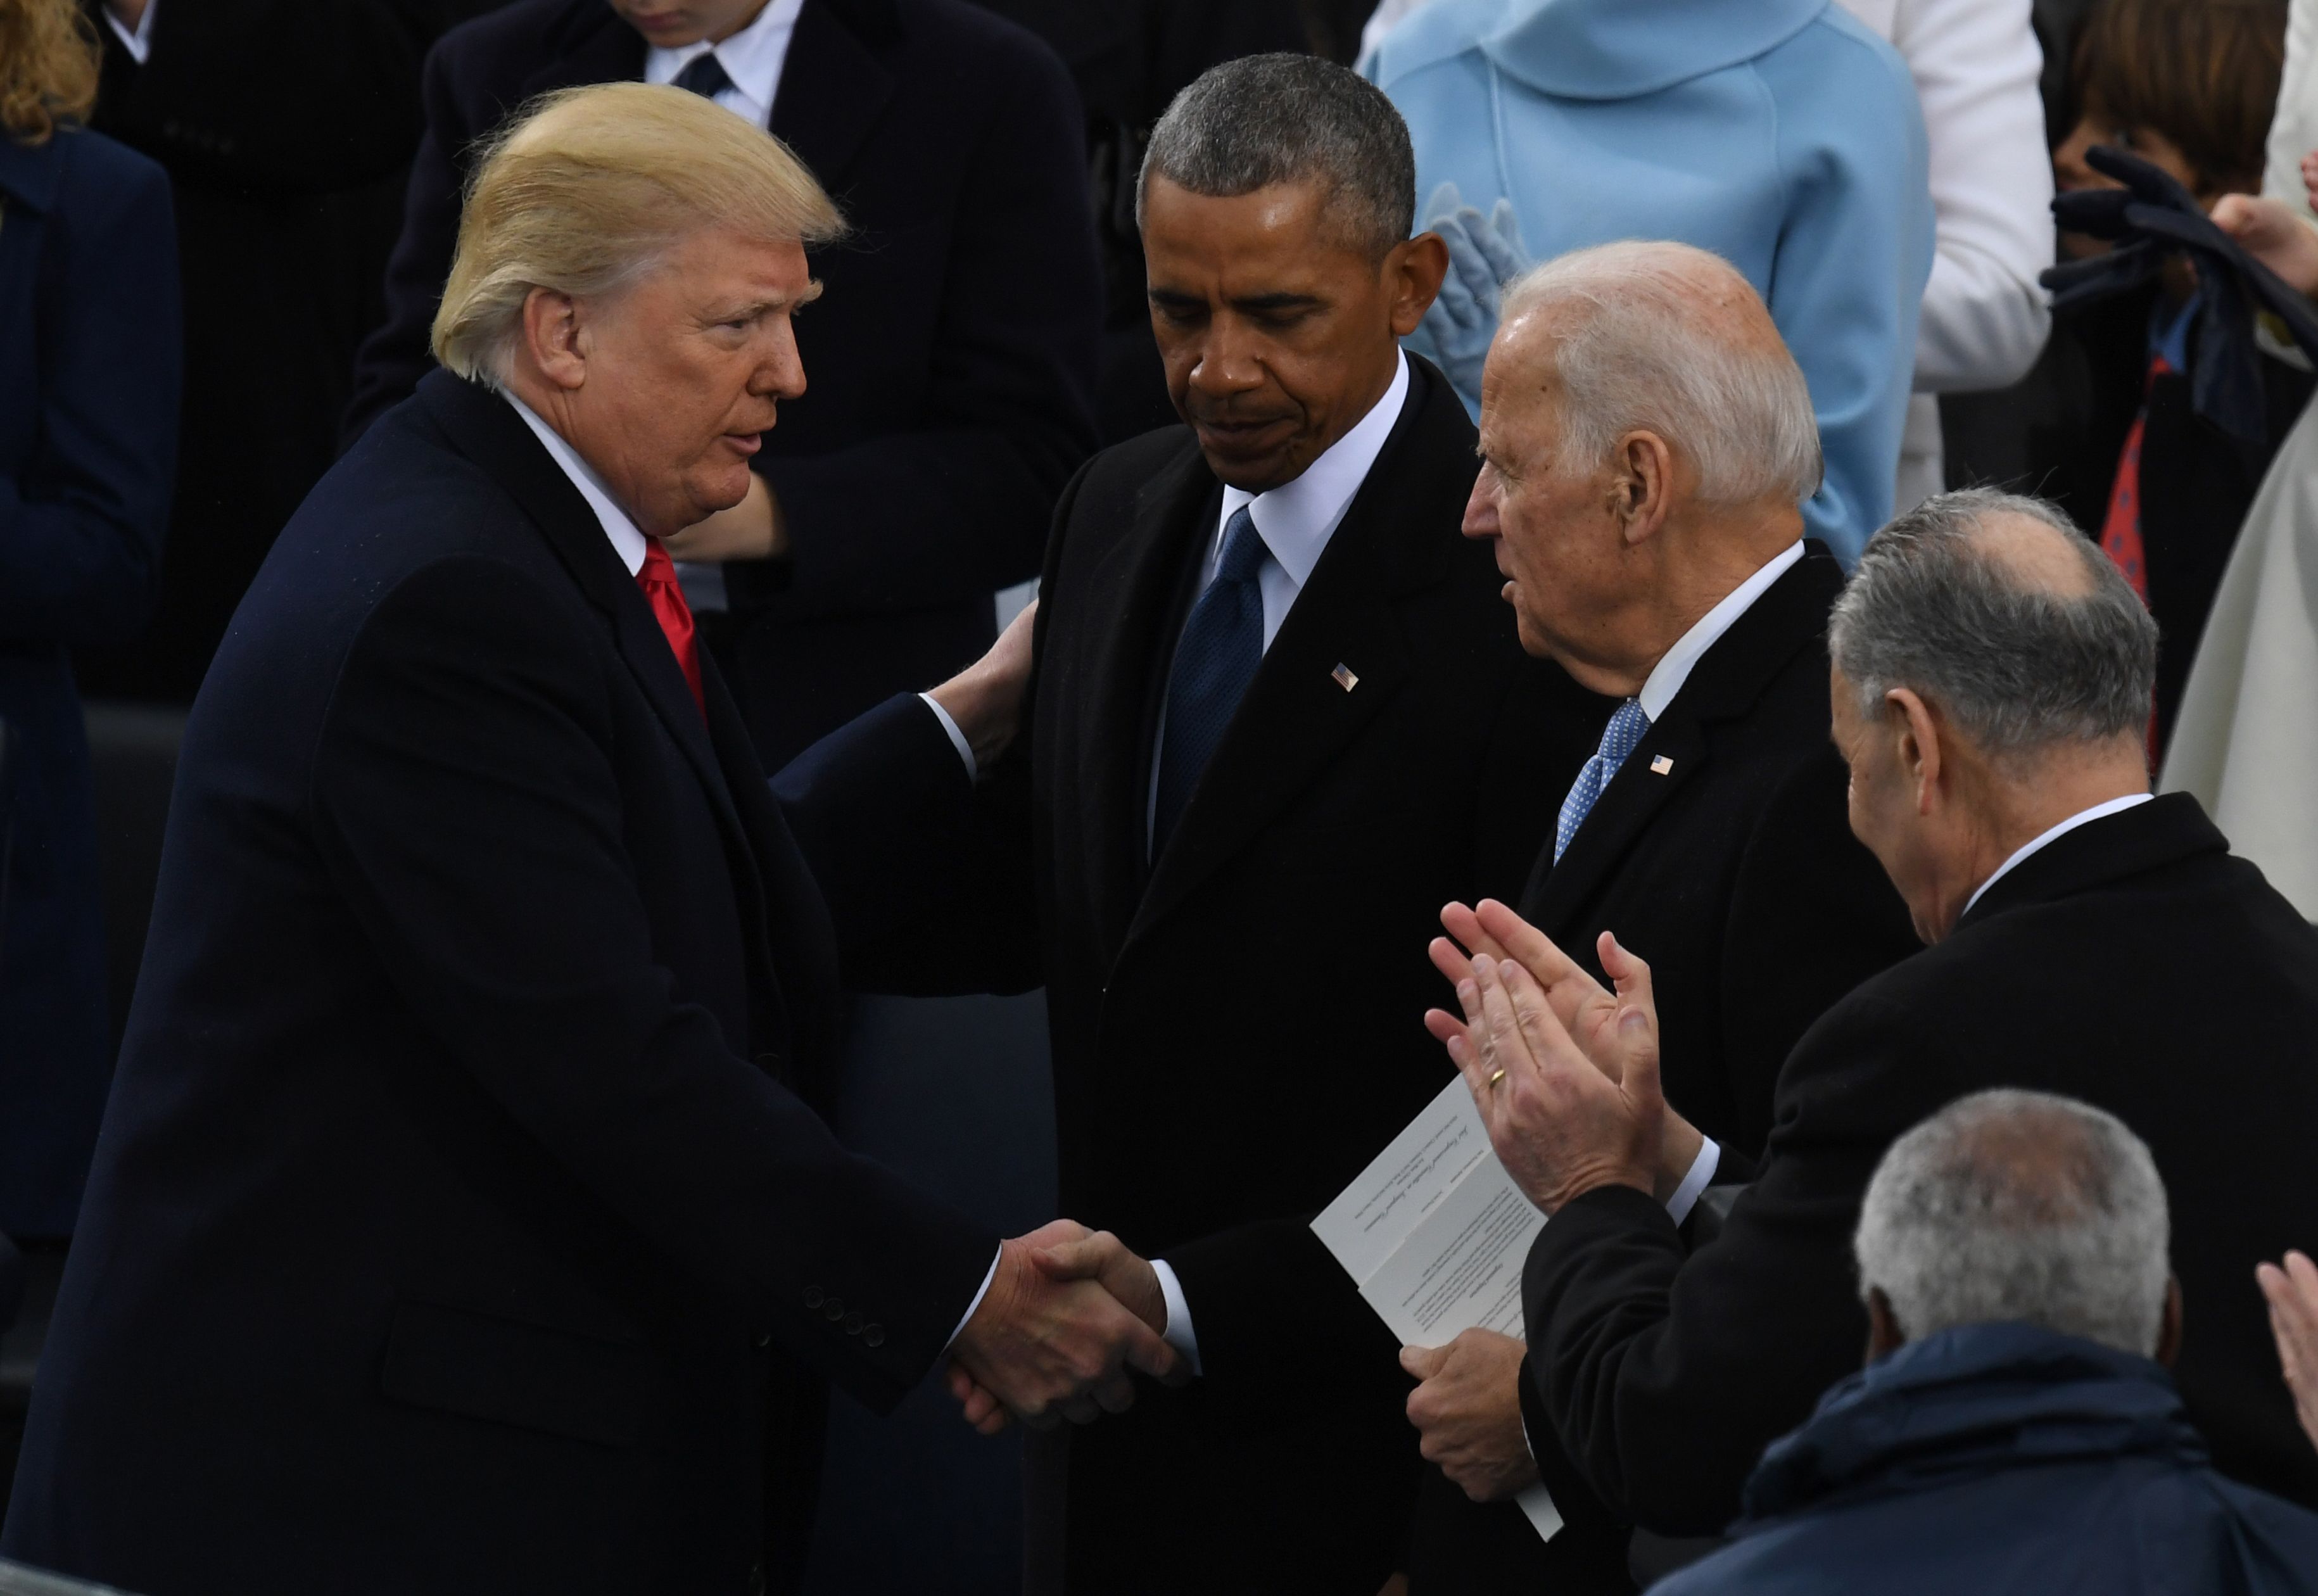 US President Donald Trump (L) shakes hands with former US President Barack Obama (C) and former vice-President Joe Biden after being sworn in as President on January 20, 2017 at the US Capitol in Washington, DC. (MARK RALSTON/AFP via Getty Images)